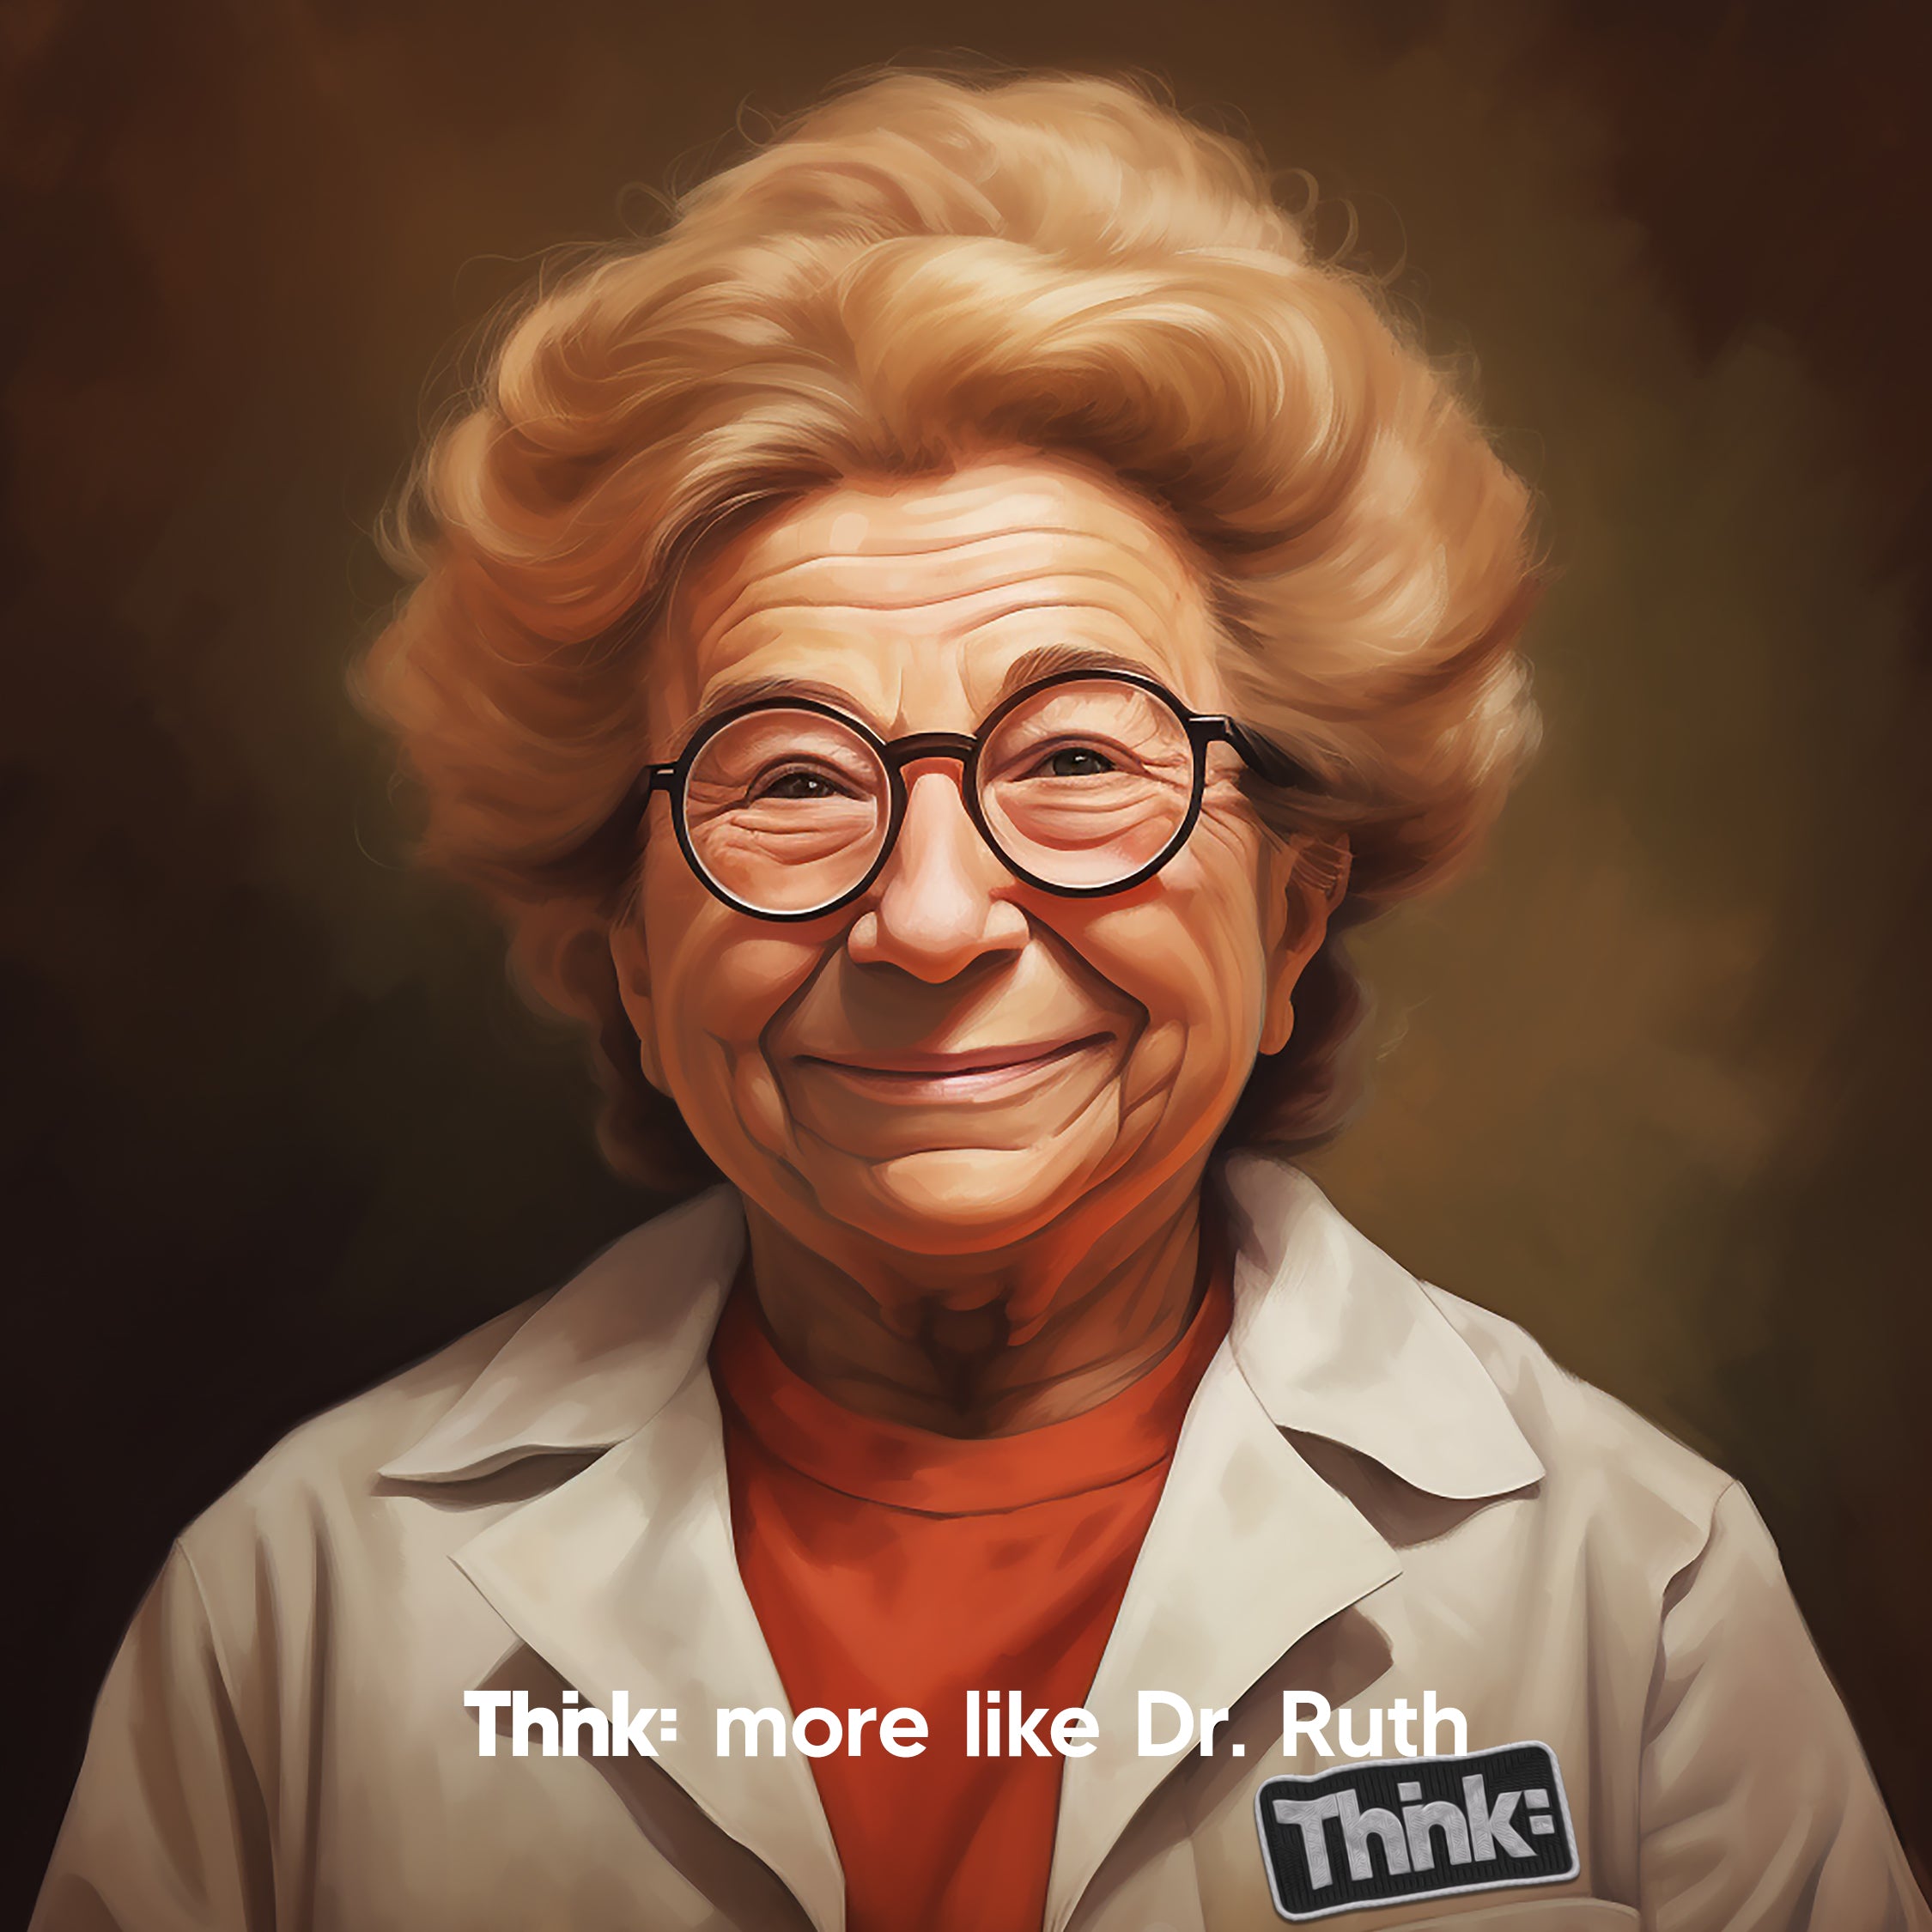 Thnk: More Like Dr. Ruth